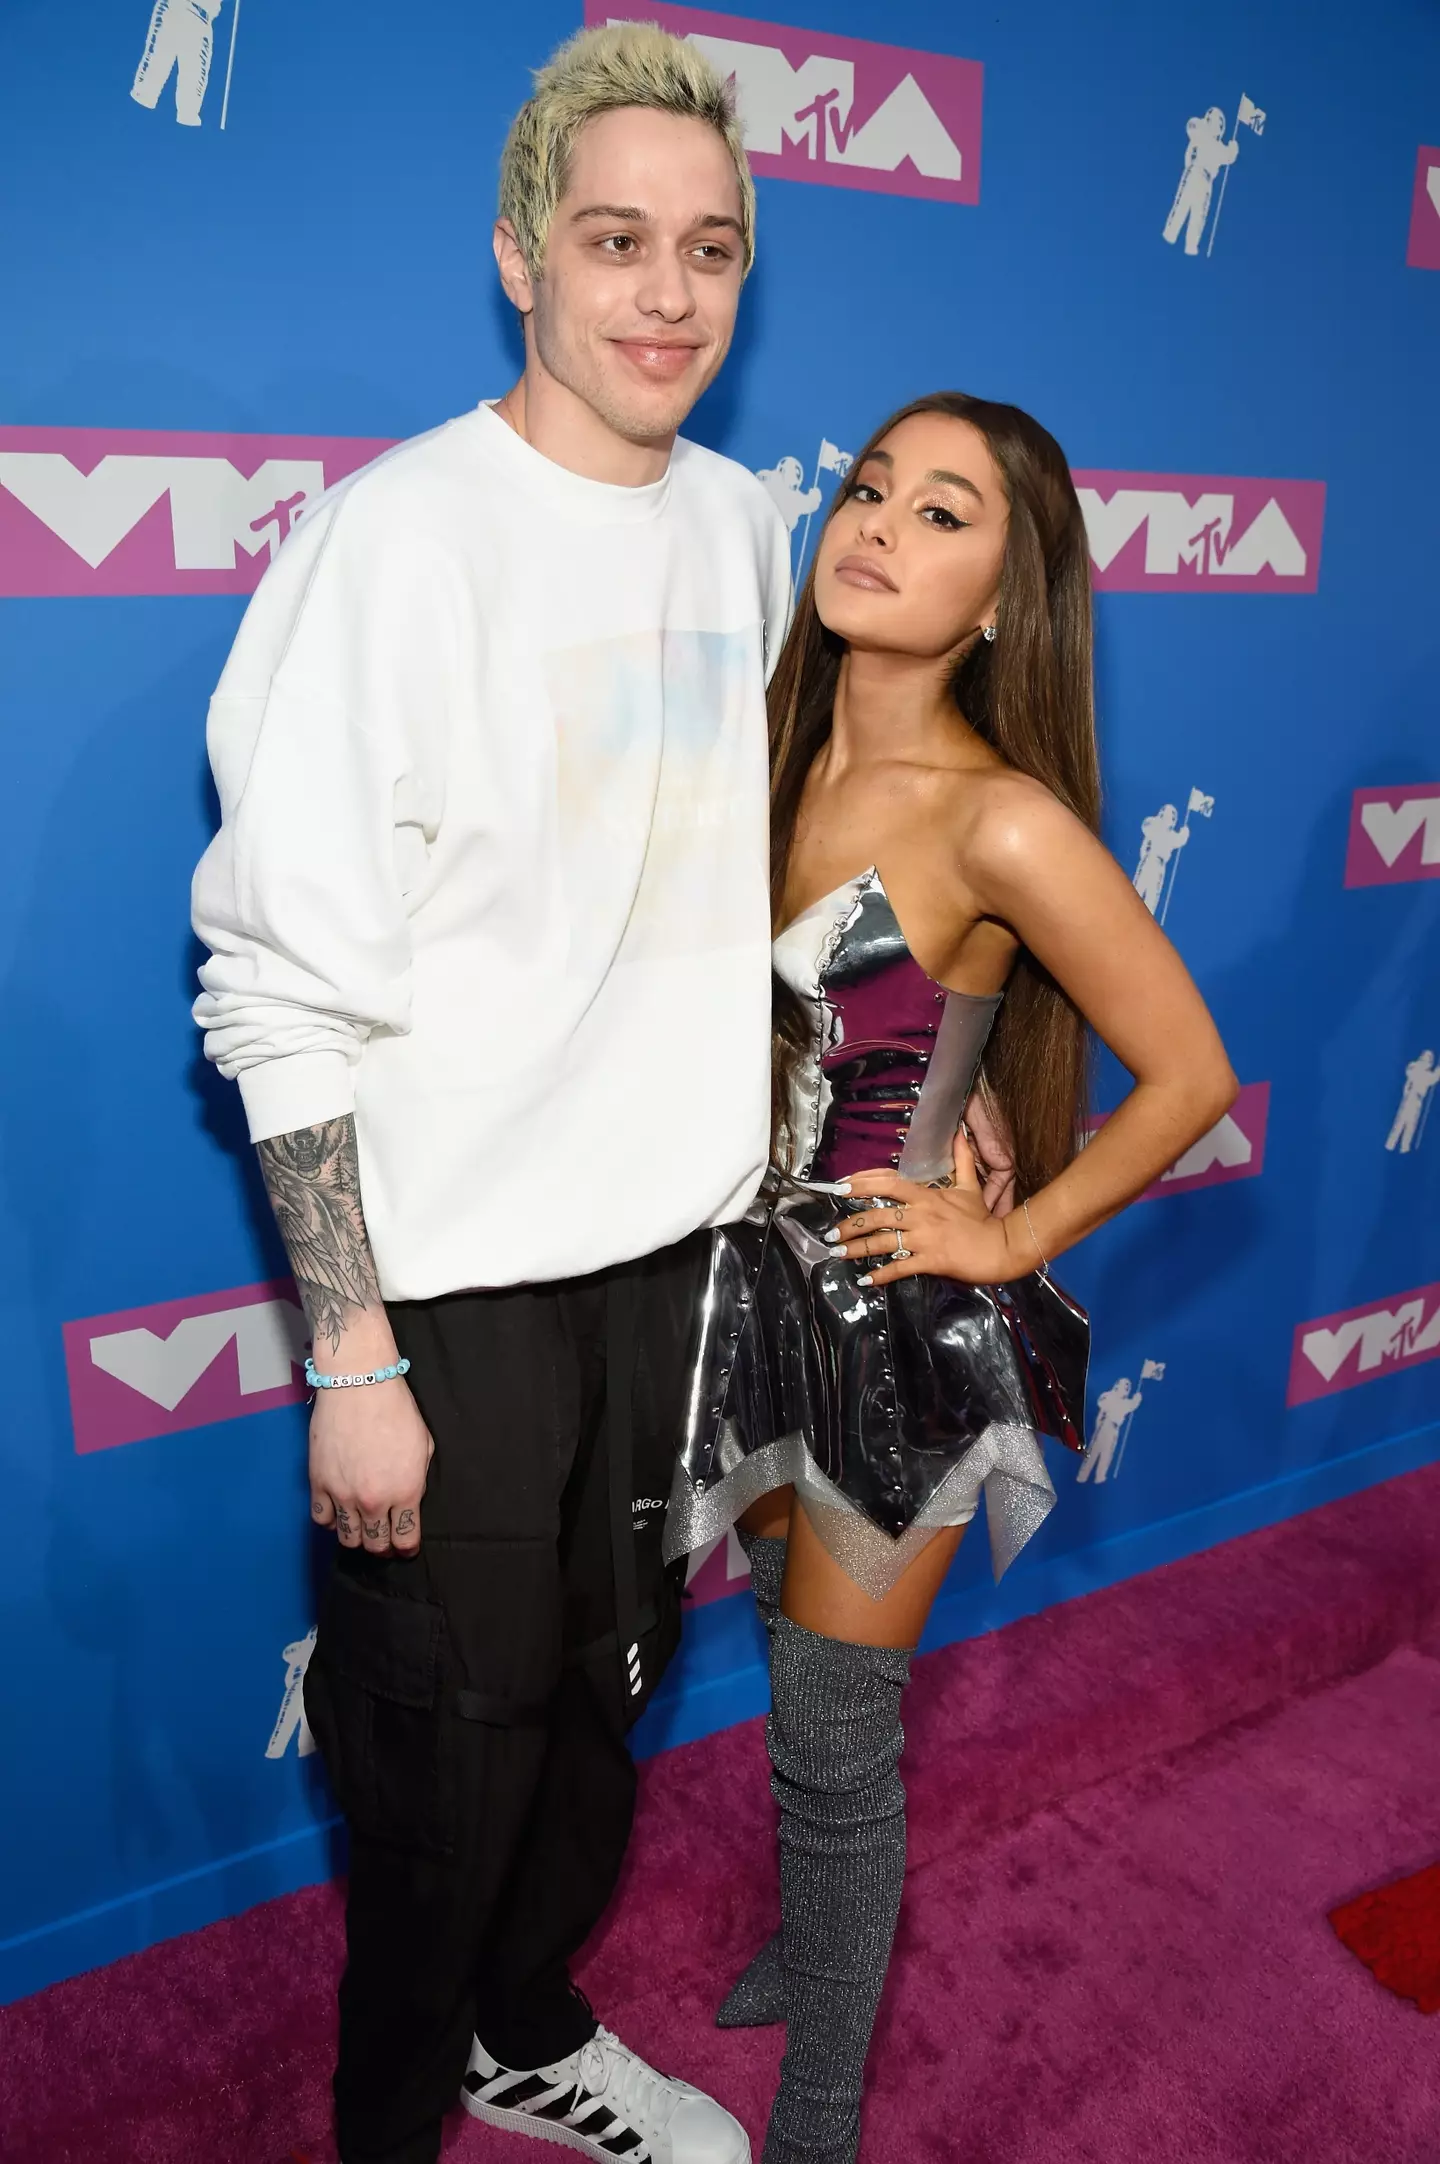 Pete Davidson and Ariana Grande dated in 2018.